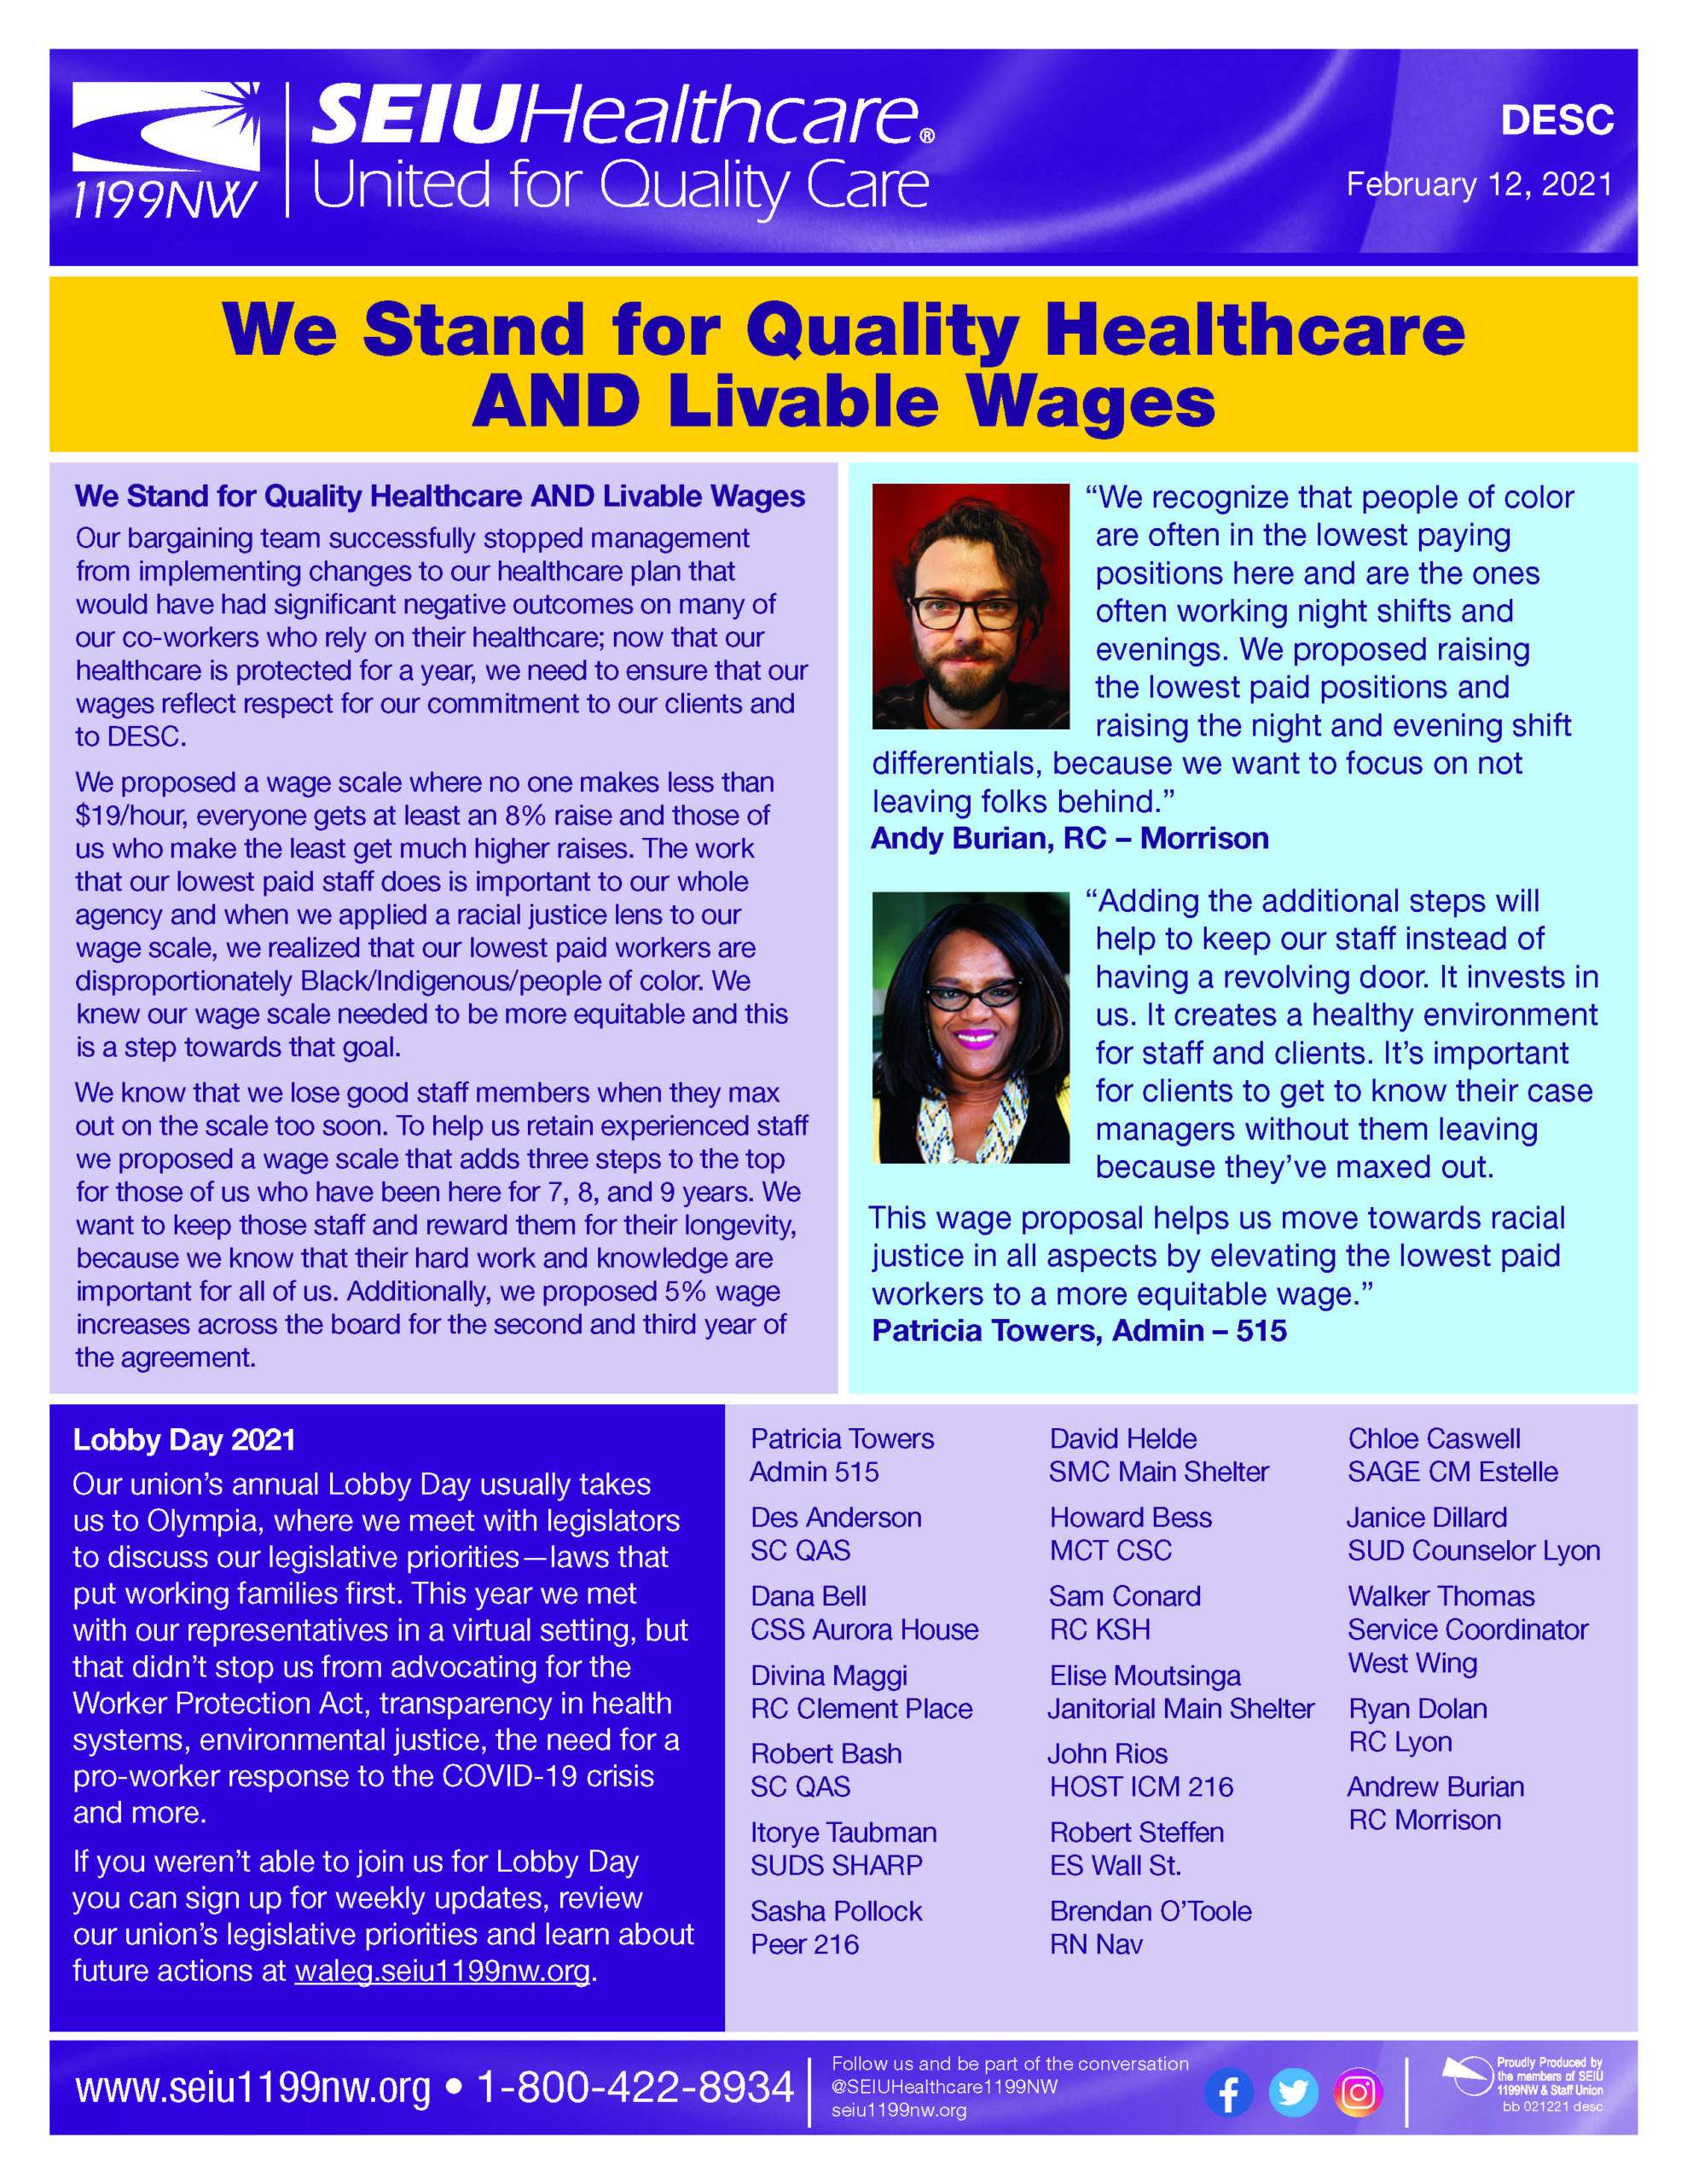 We Stand for Quality Healthcare AND Livable Wages